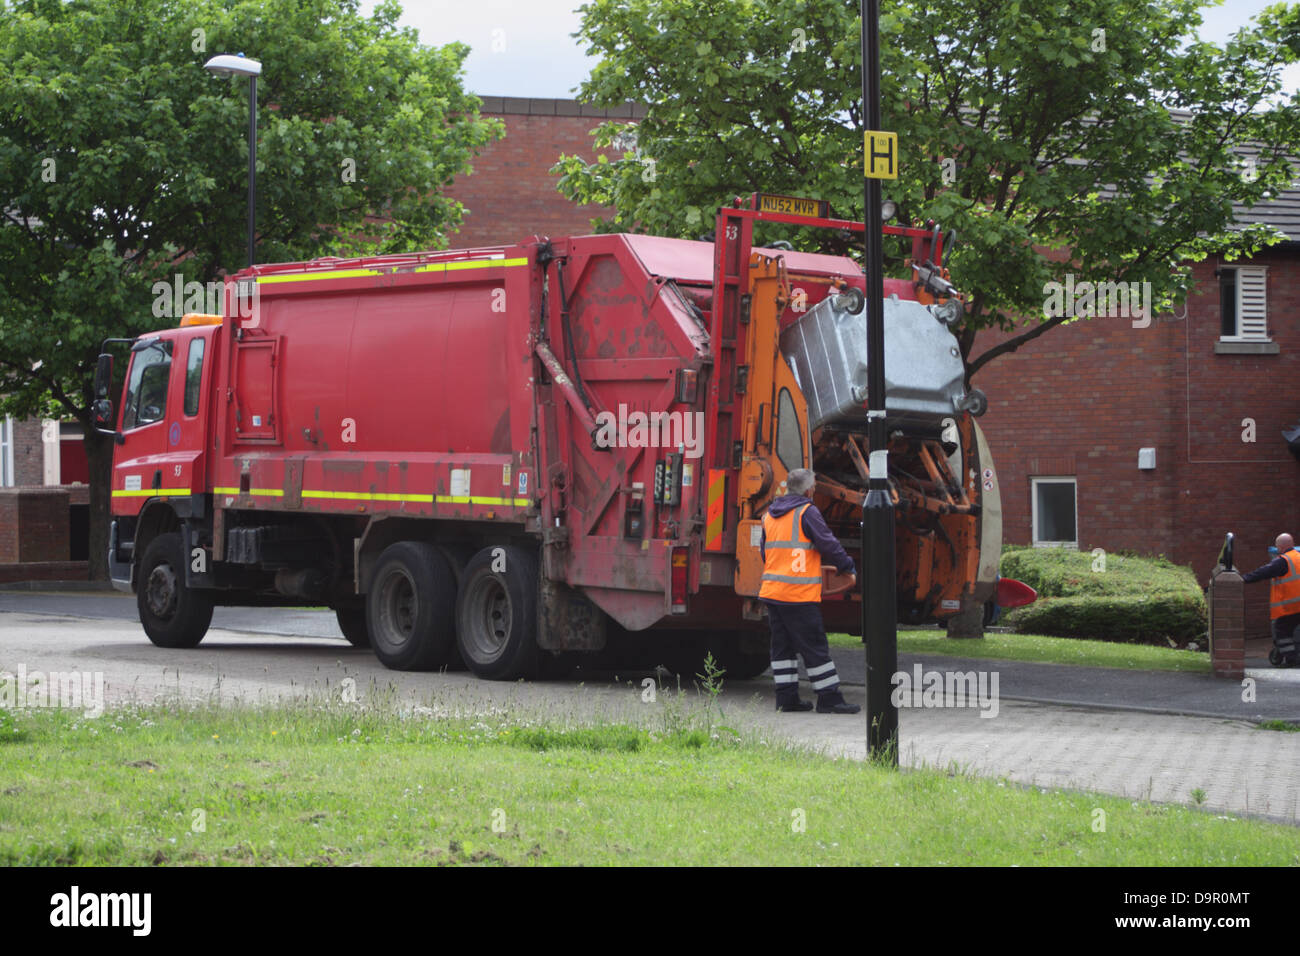 bin lorry / refuse collection. Image shows bin man loading a refuse bin into the garbage truck. Stock Photo